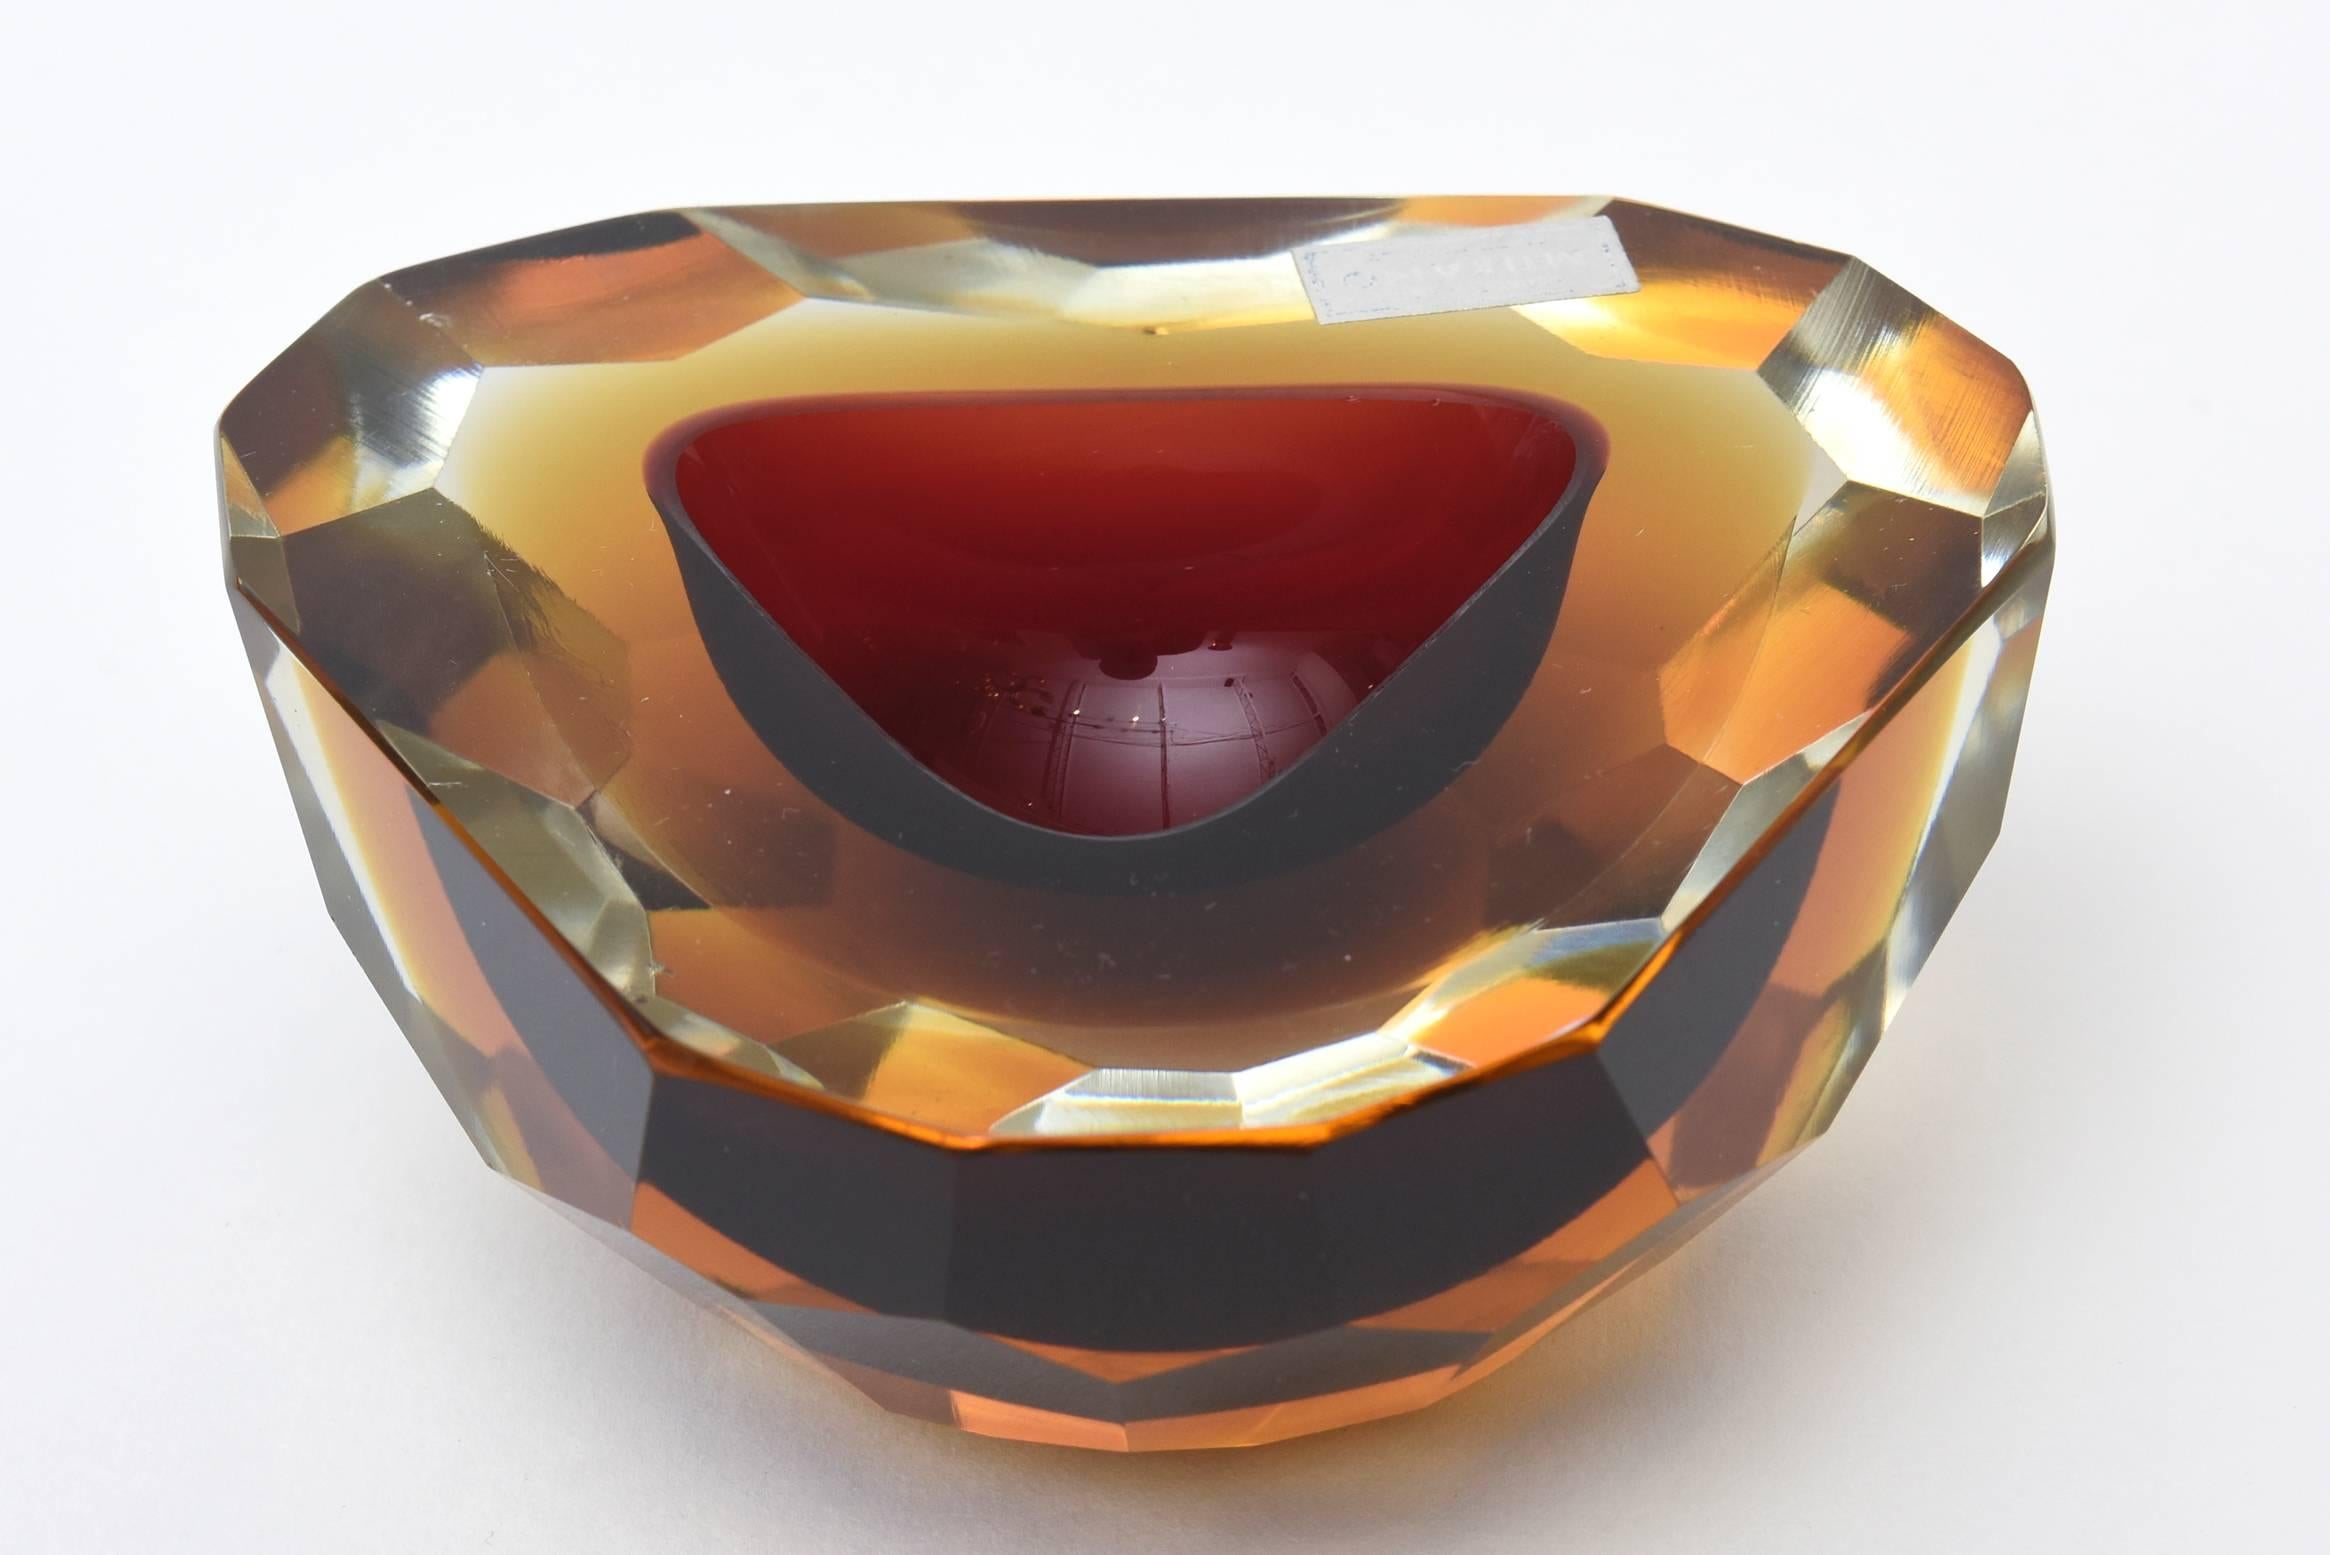 This amazing and stunning Italian vintage Murano Sommerso geode bowl has flat cut polished tops and diamond faceted sides and top also. This is a gorgeous heavy piece of glass in sculptural form.
It is amber infused with red, cranberry/yellow